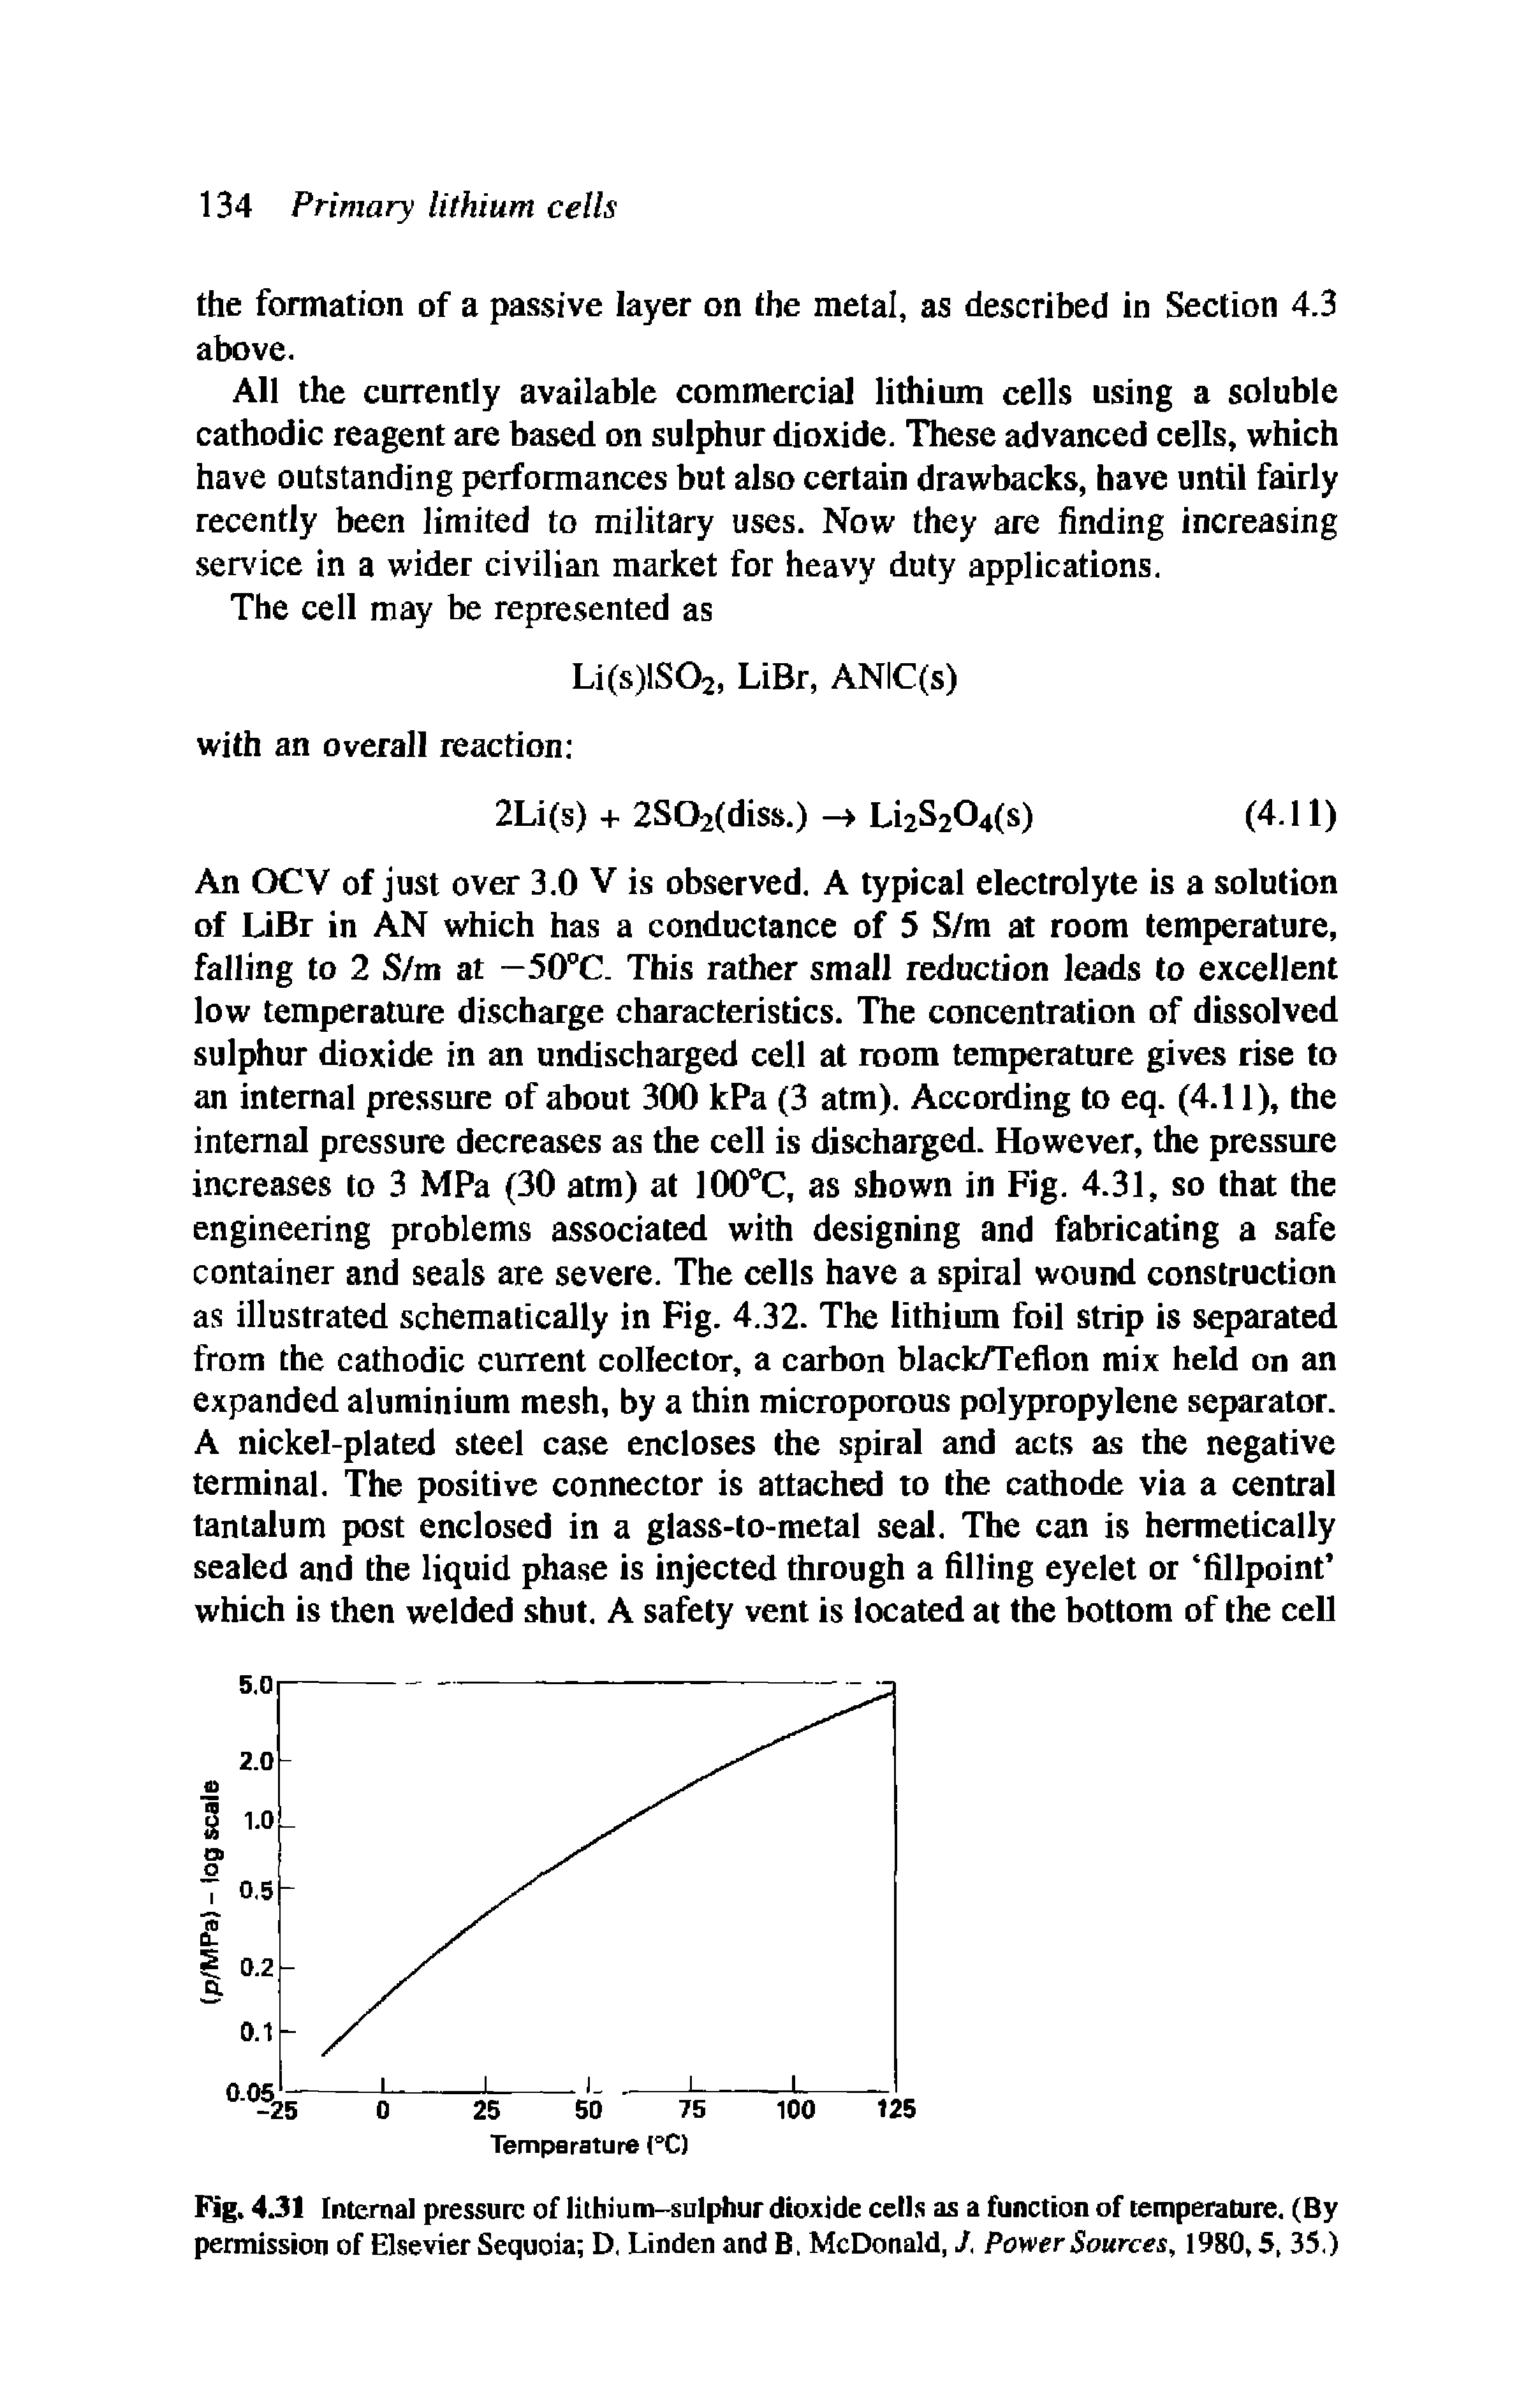 Fig. 4.31 Internal pressure of lithium-sulphur dioxide cells as a function of temperature. (By permission of Elsevier Sequoia D, Linden and B, McDonald, J, Power Sources, 1980,5, 35.)...